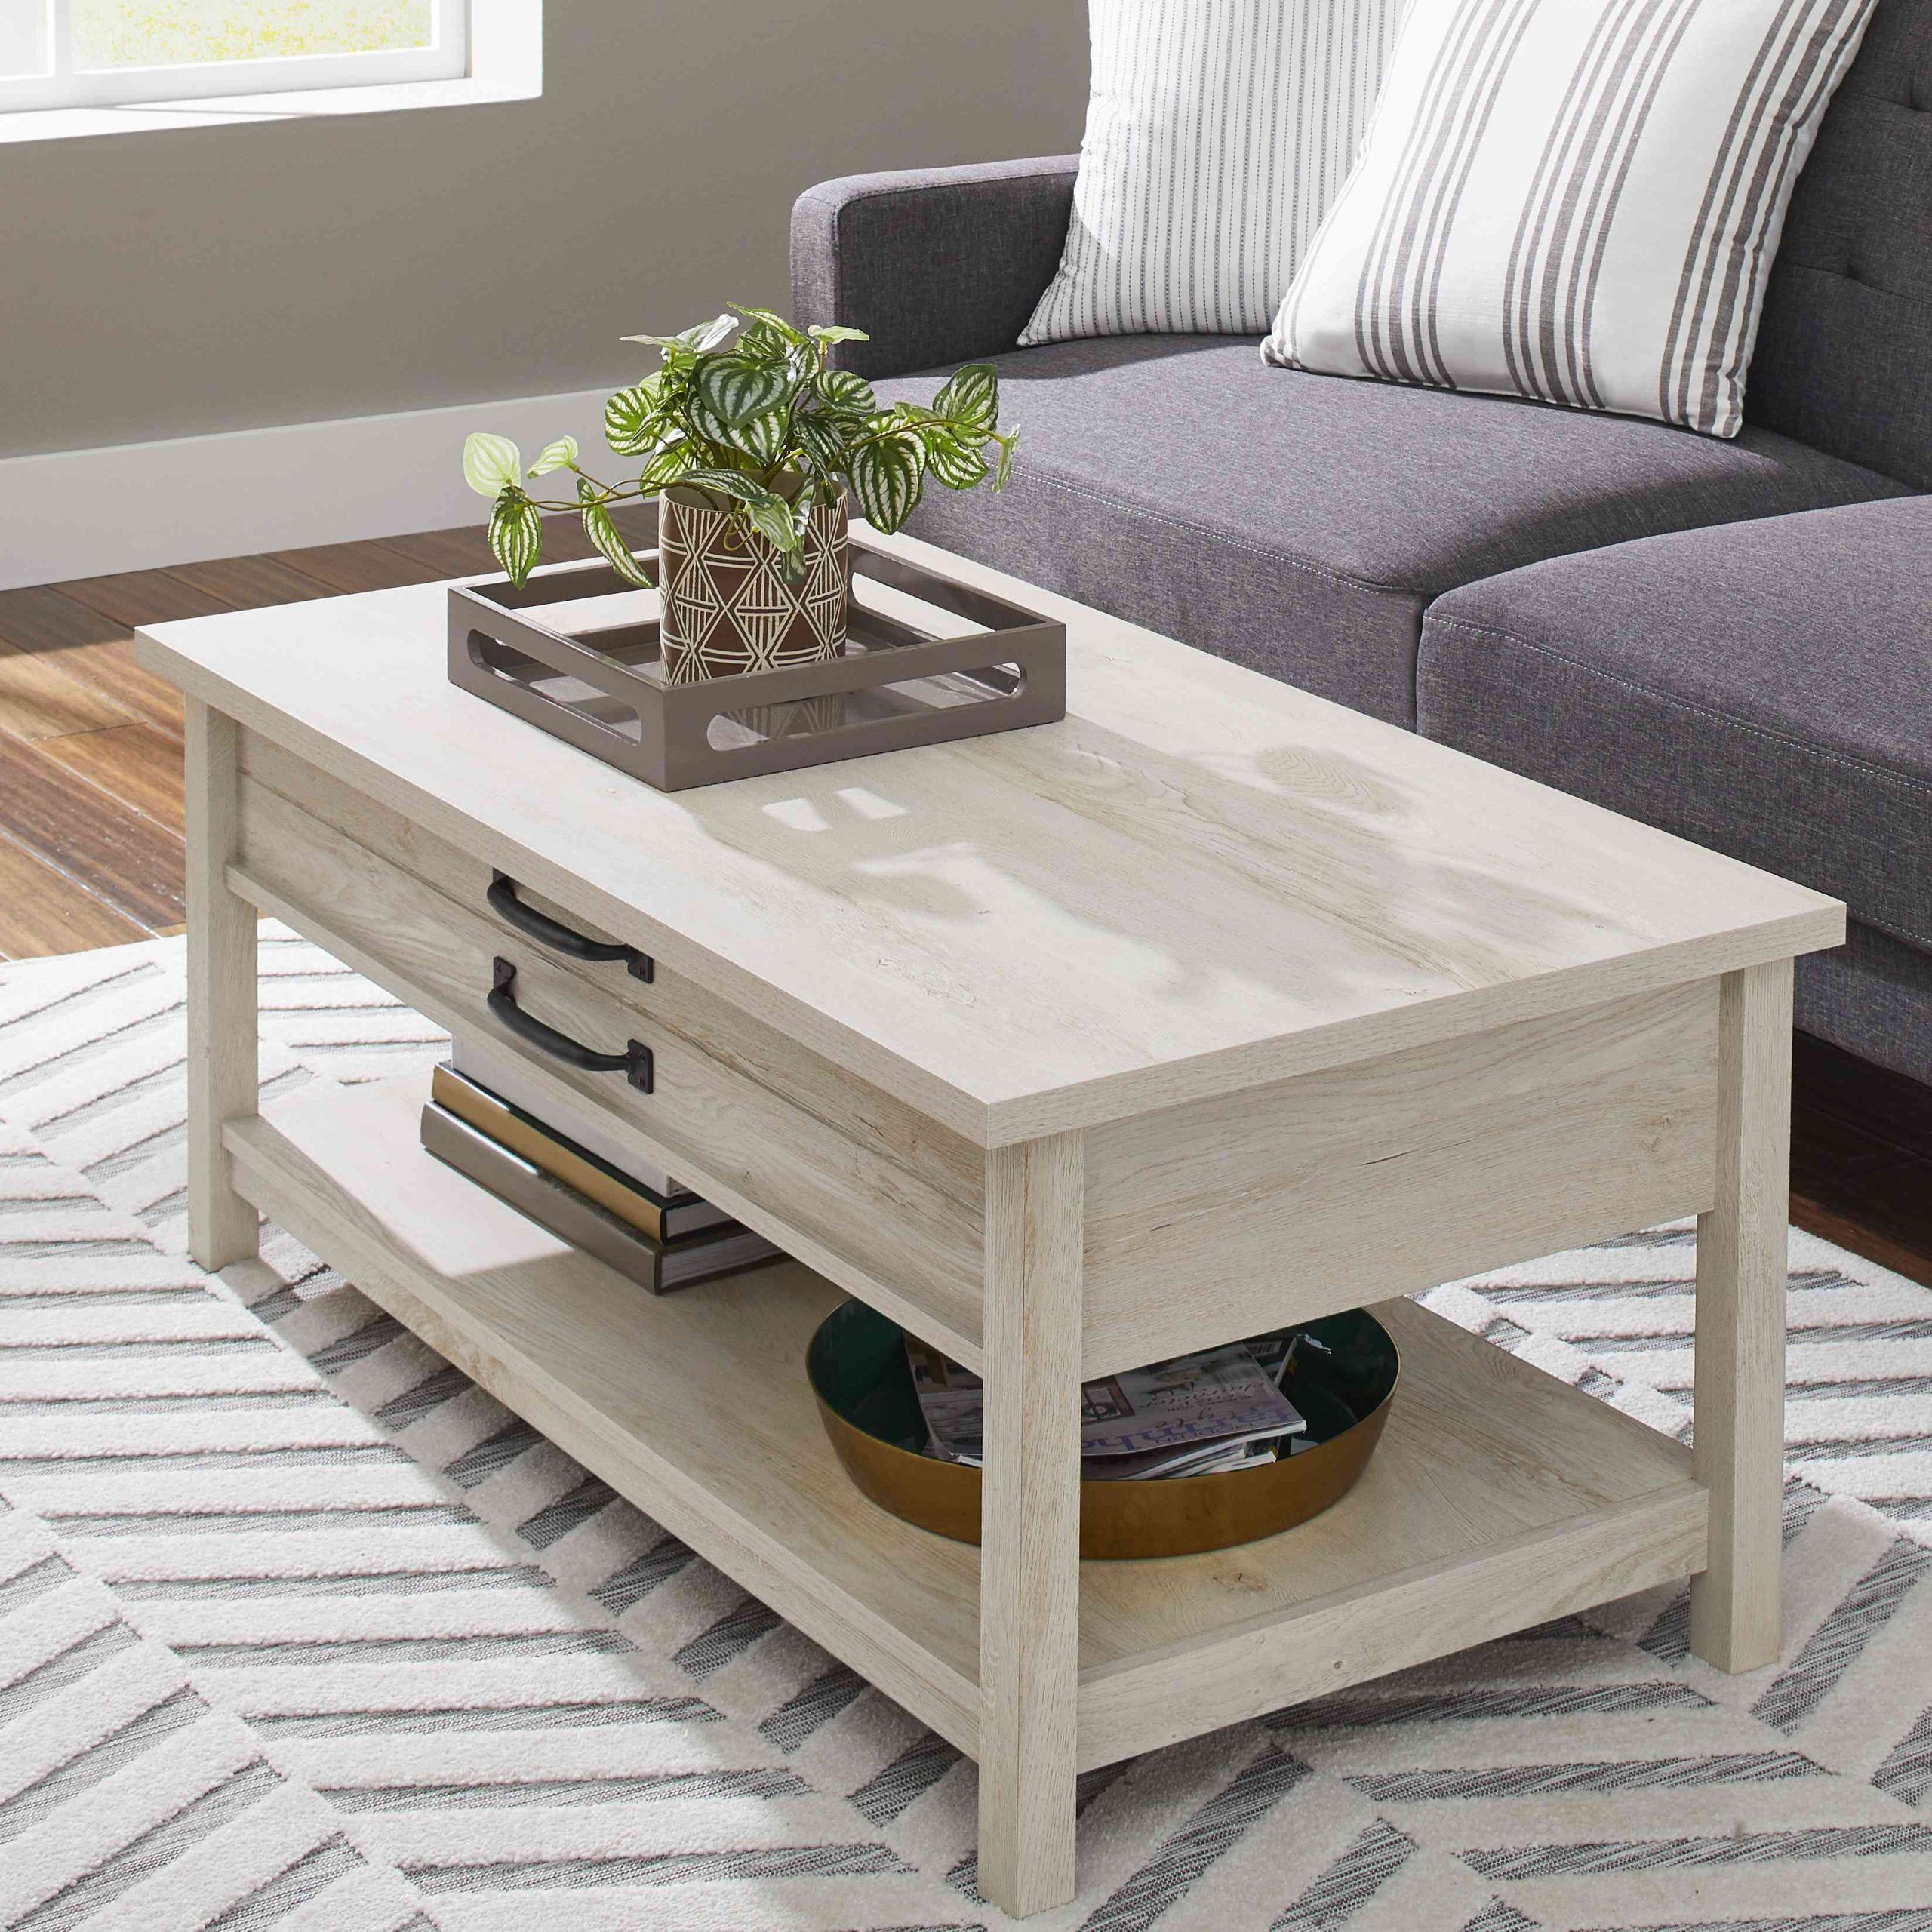 The 9 Best Lift Top Coffee Tables Of 2022 Within Lift Top Coffee Tables With Shelves (Gallery 5 of 20)